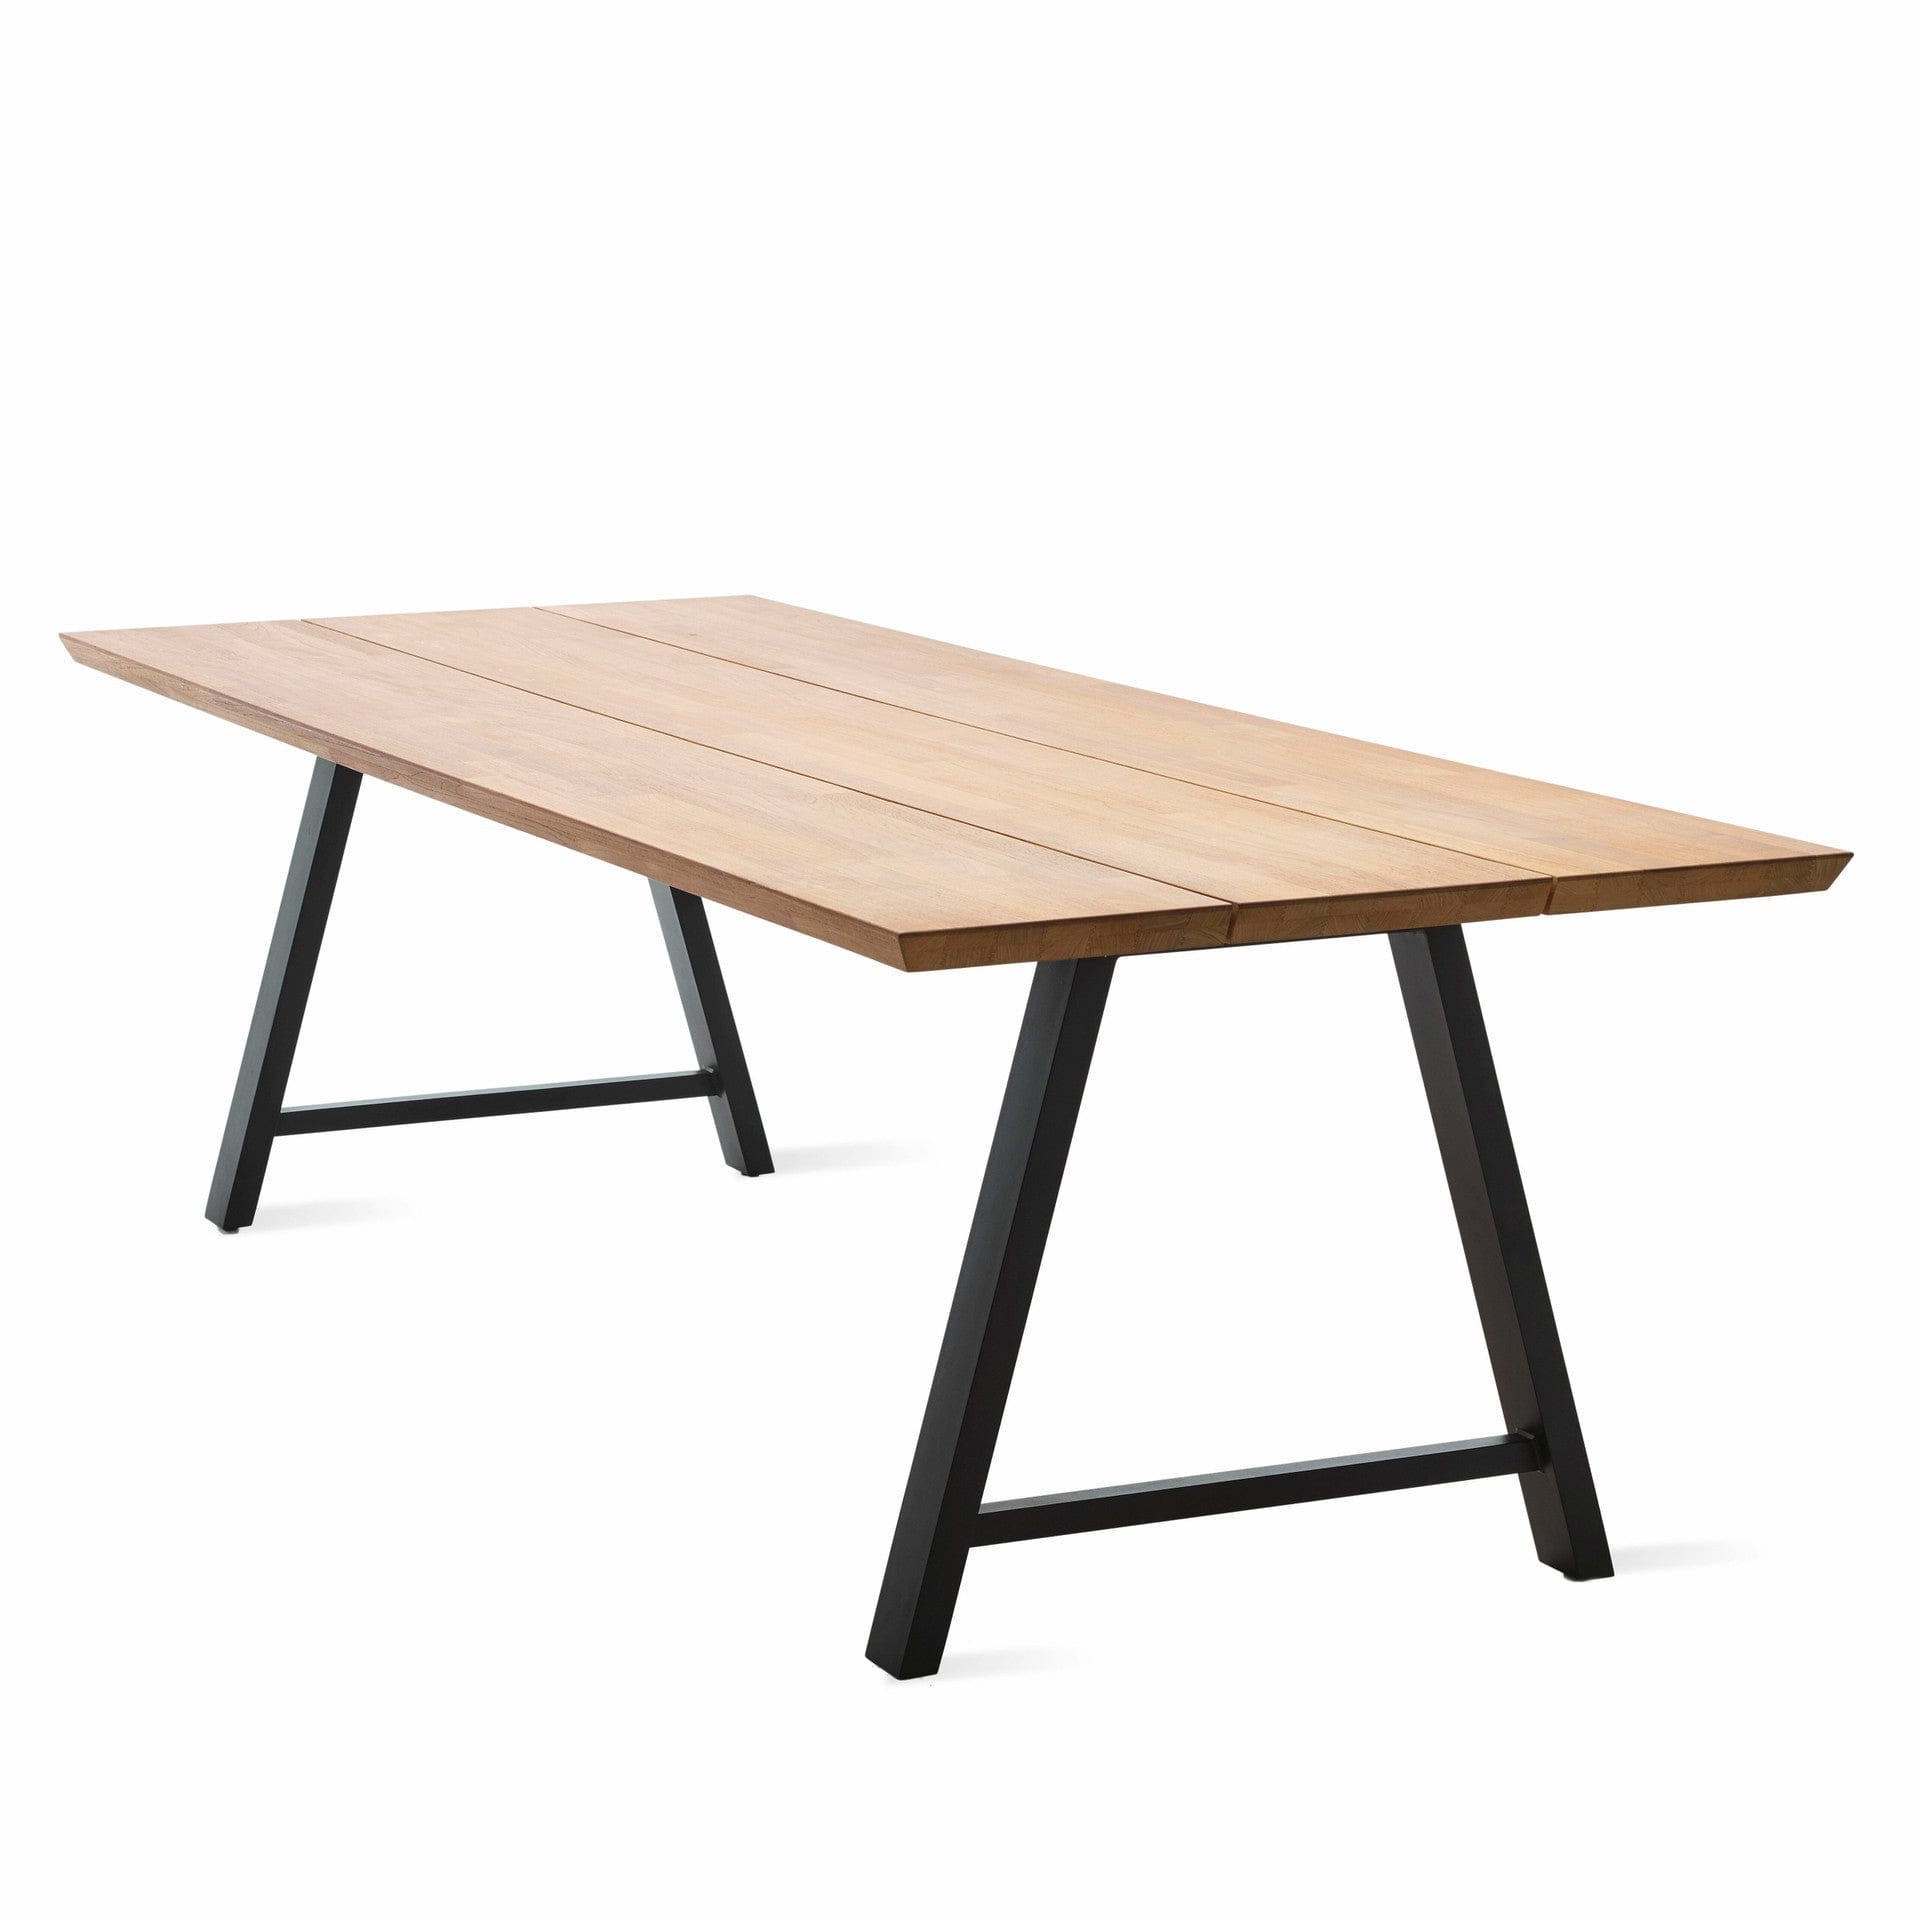 Matteo Outdoor Dining Table 85" x 40"